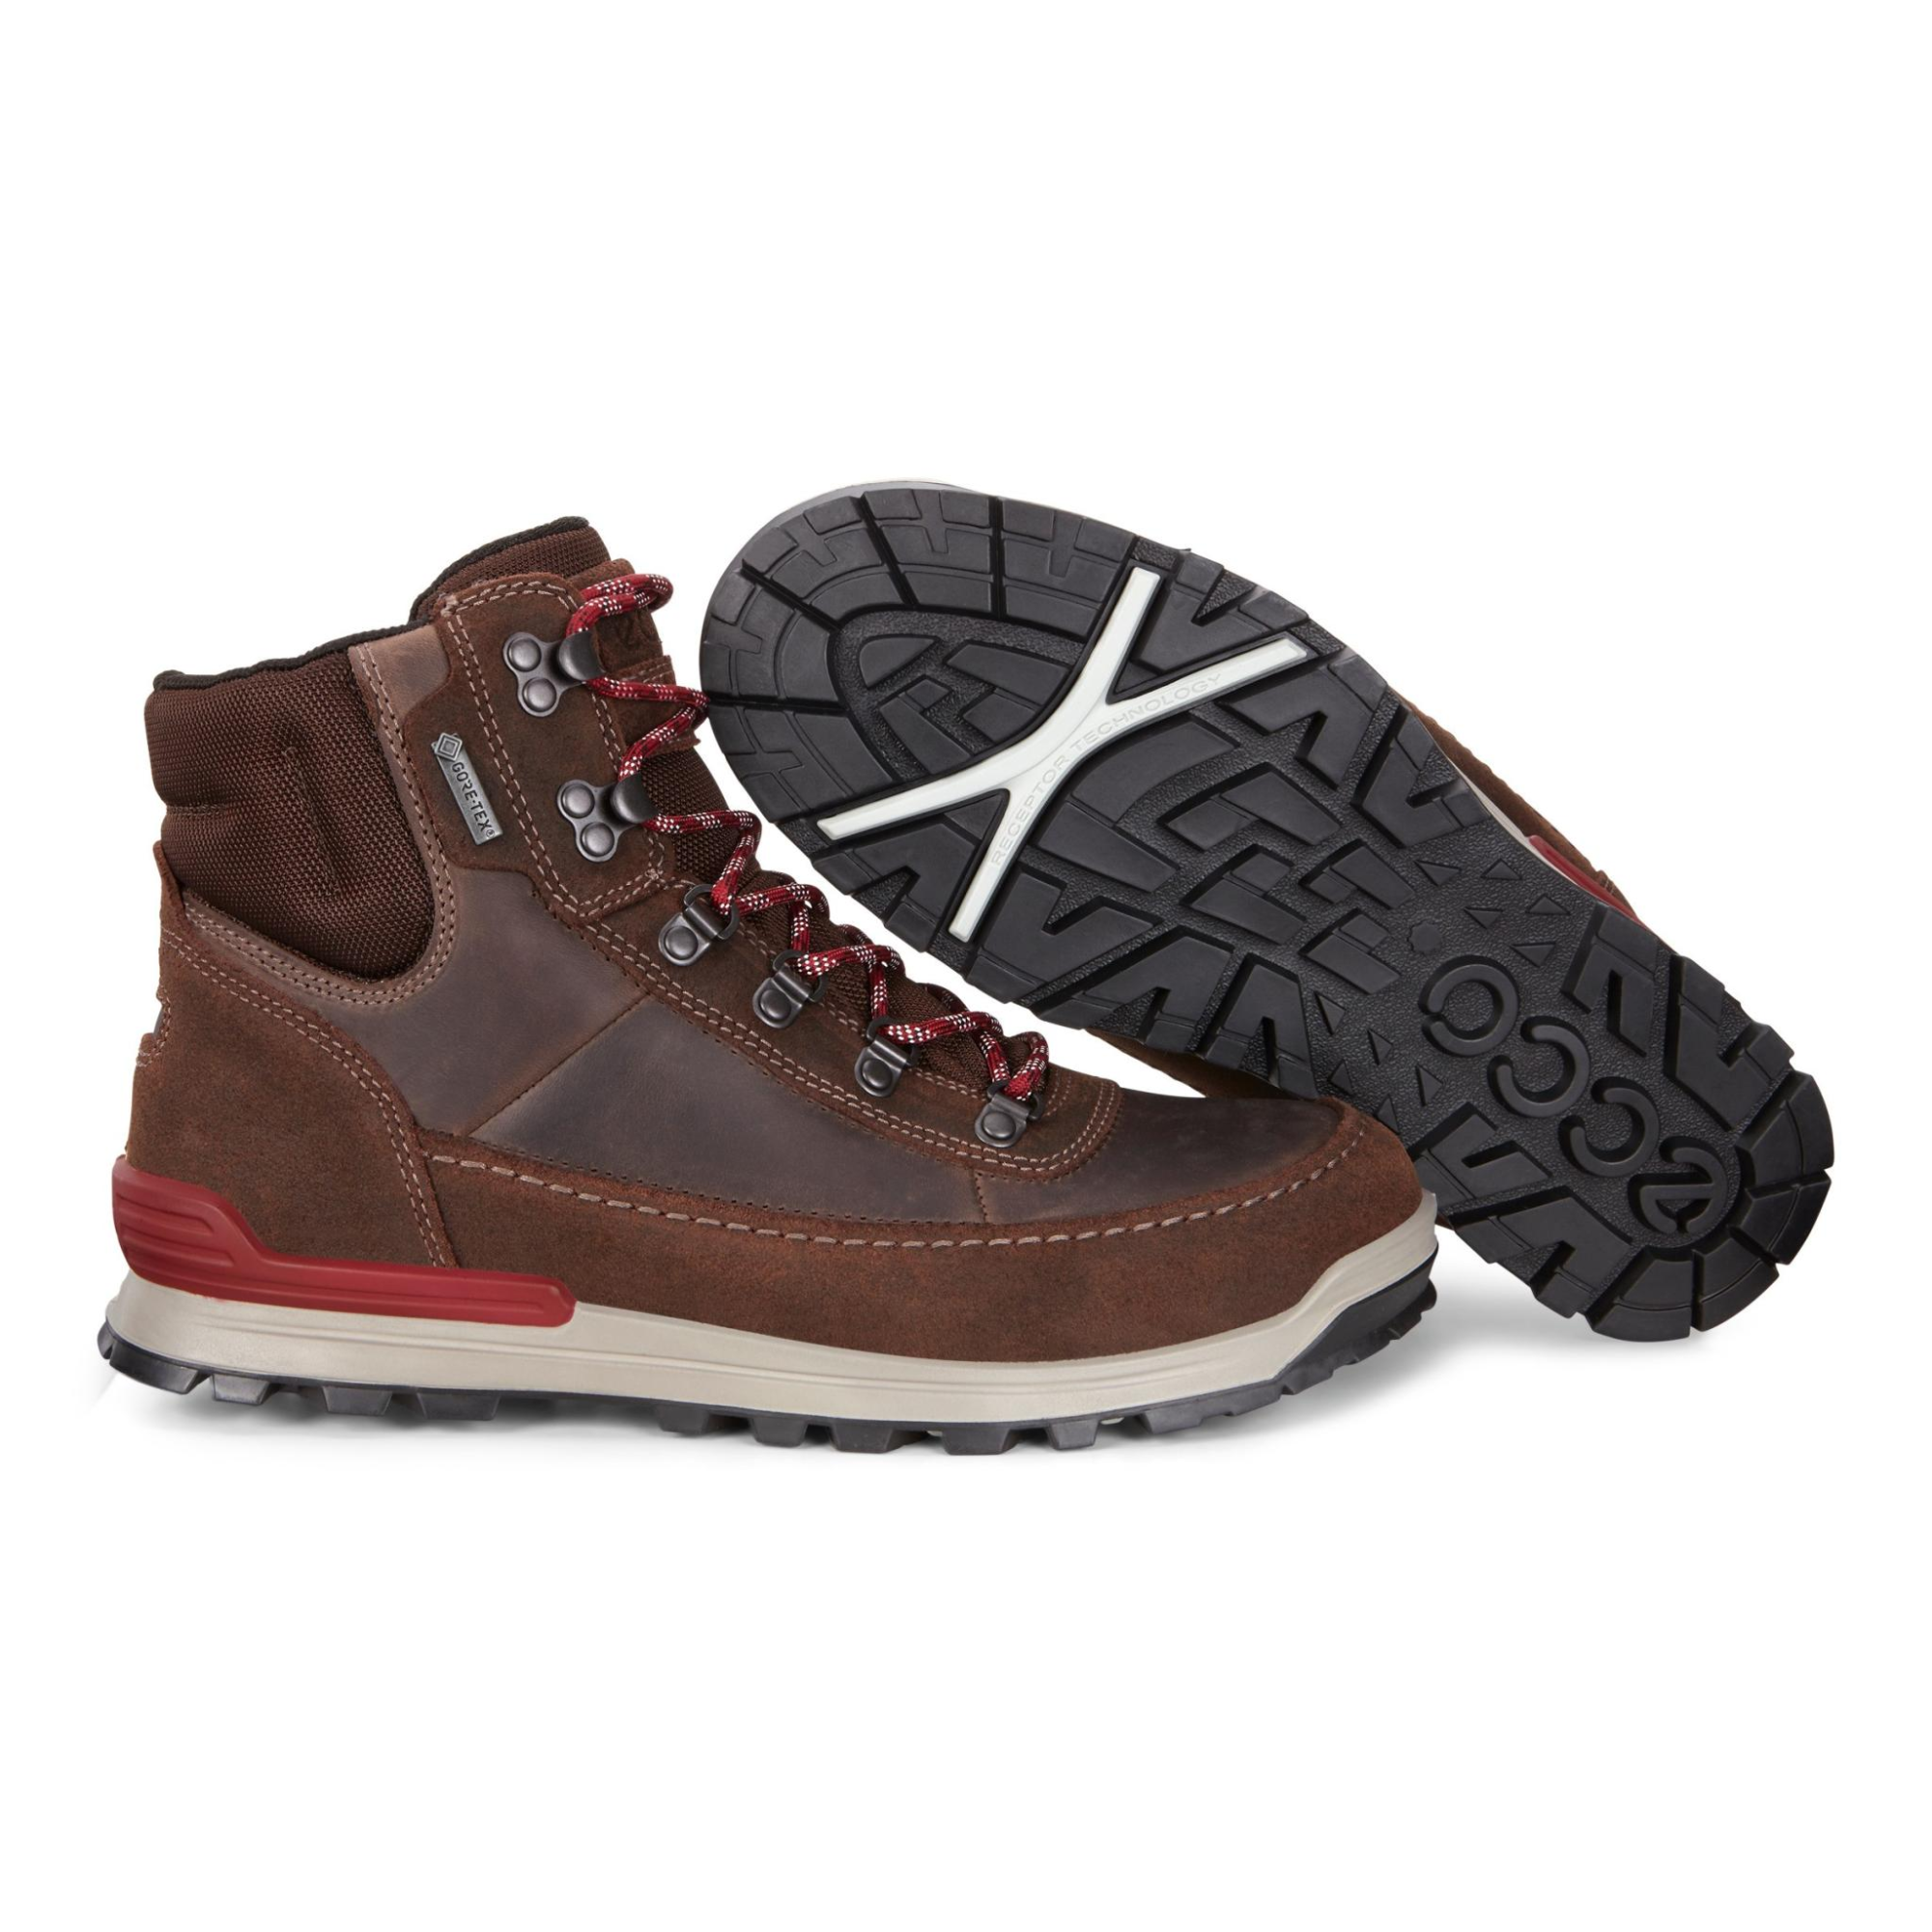 bleg i gang misundelse Ecco Mens Oregon GTX Boot 46 - Products - Veryk Mall - Veryk Mall, many  product, quick response, safe your money!